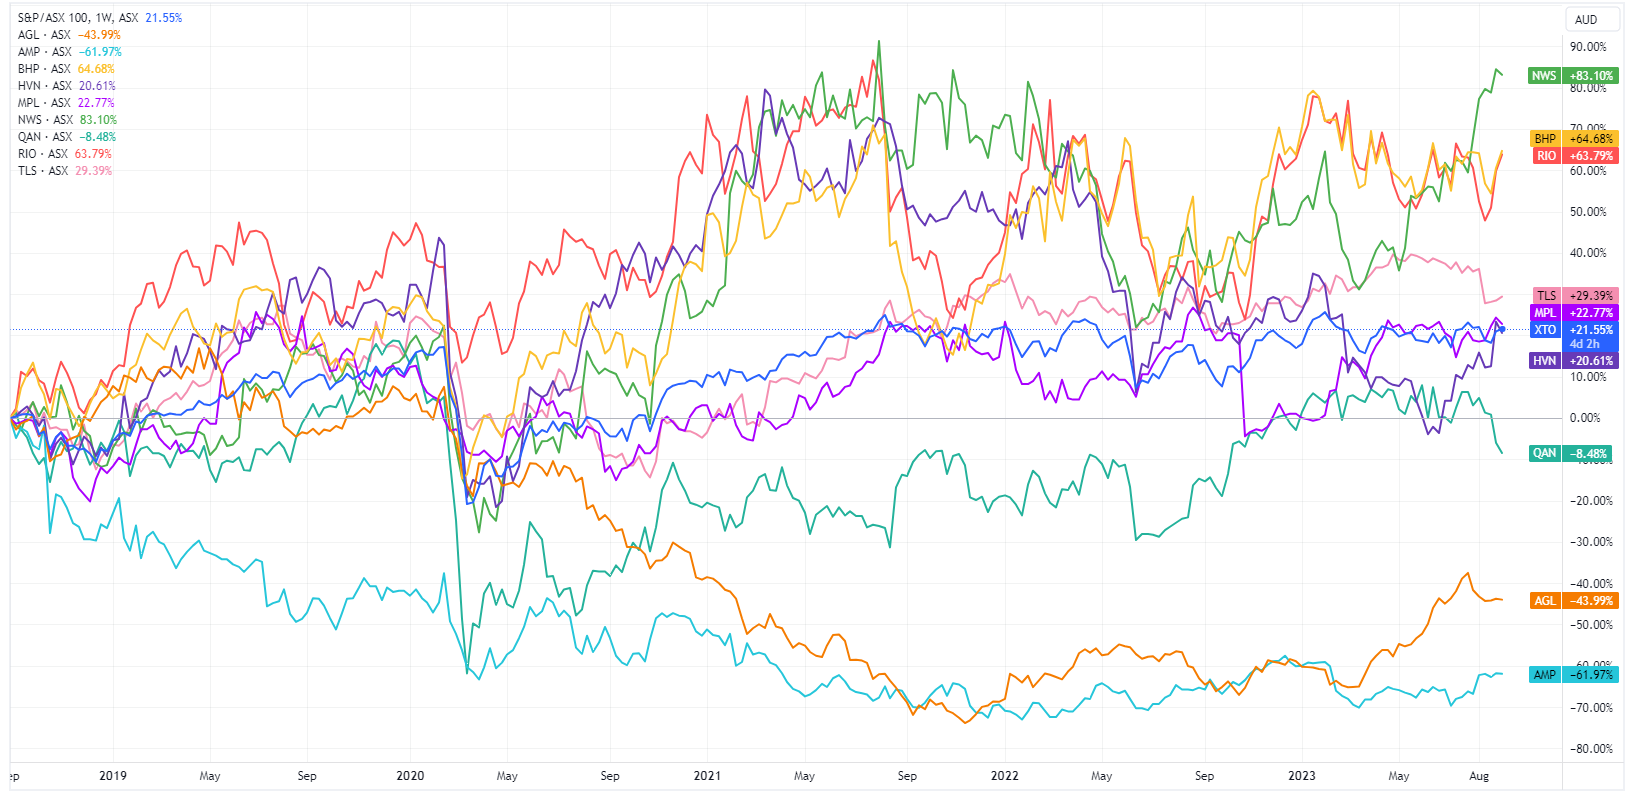 Selection of most distrusted companies, 5-year share price performance. Source: TradingView